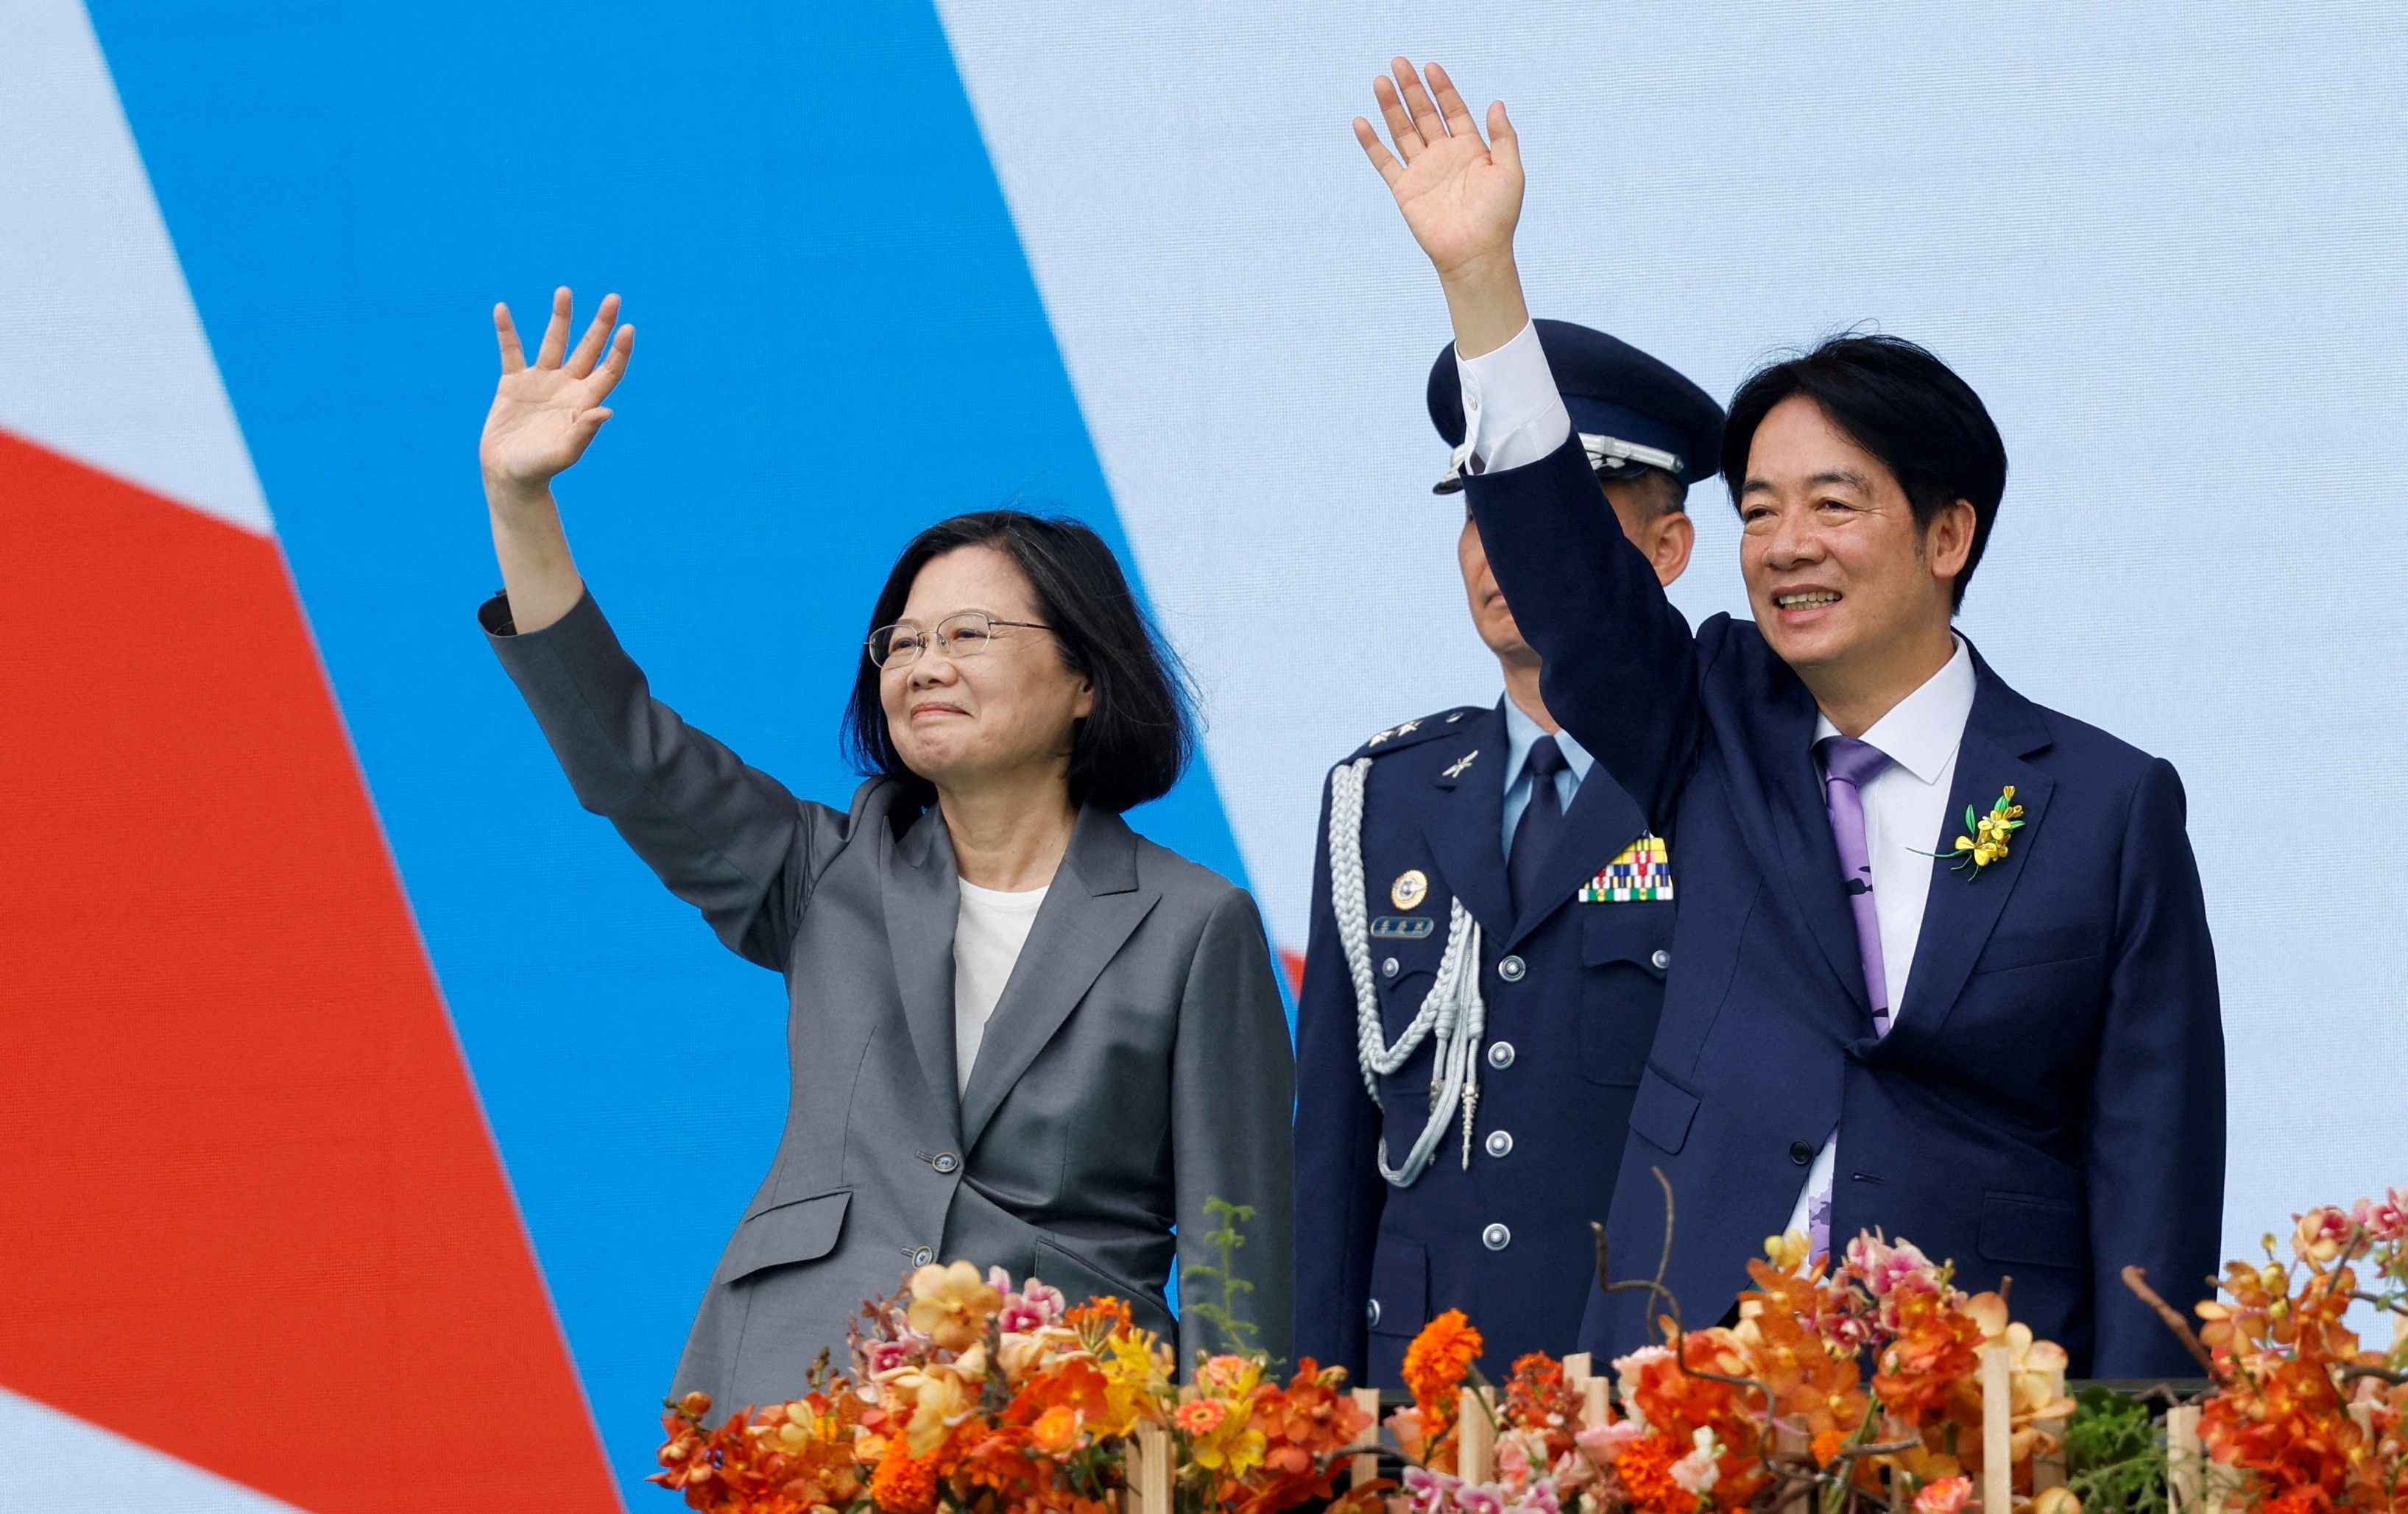 Inauguration of Taiwan’s new president triggers usual pearl-clutching